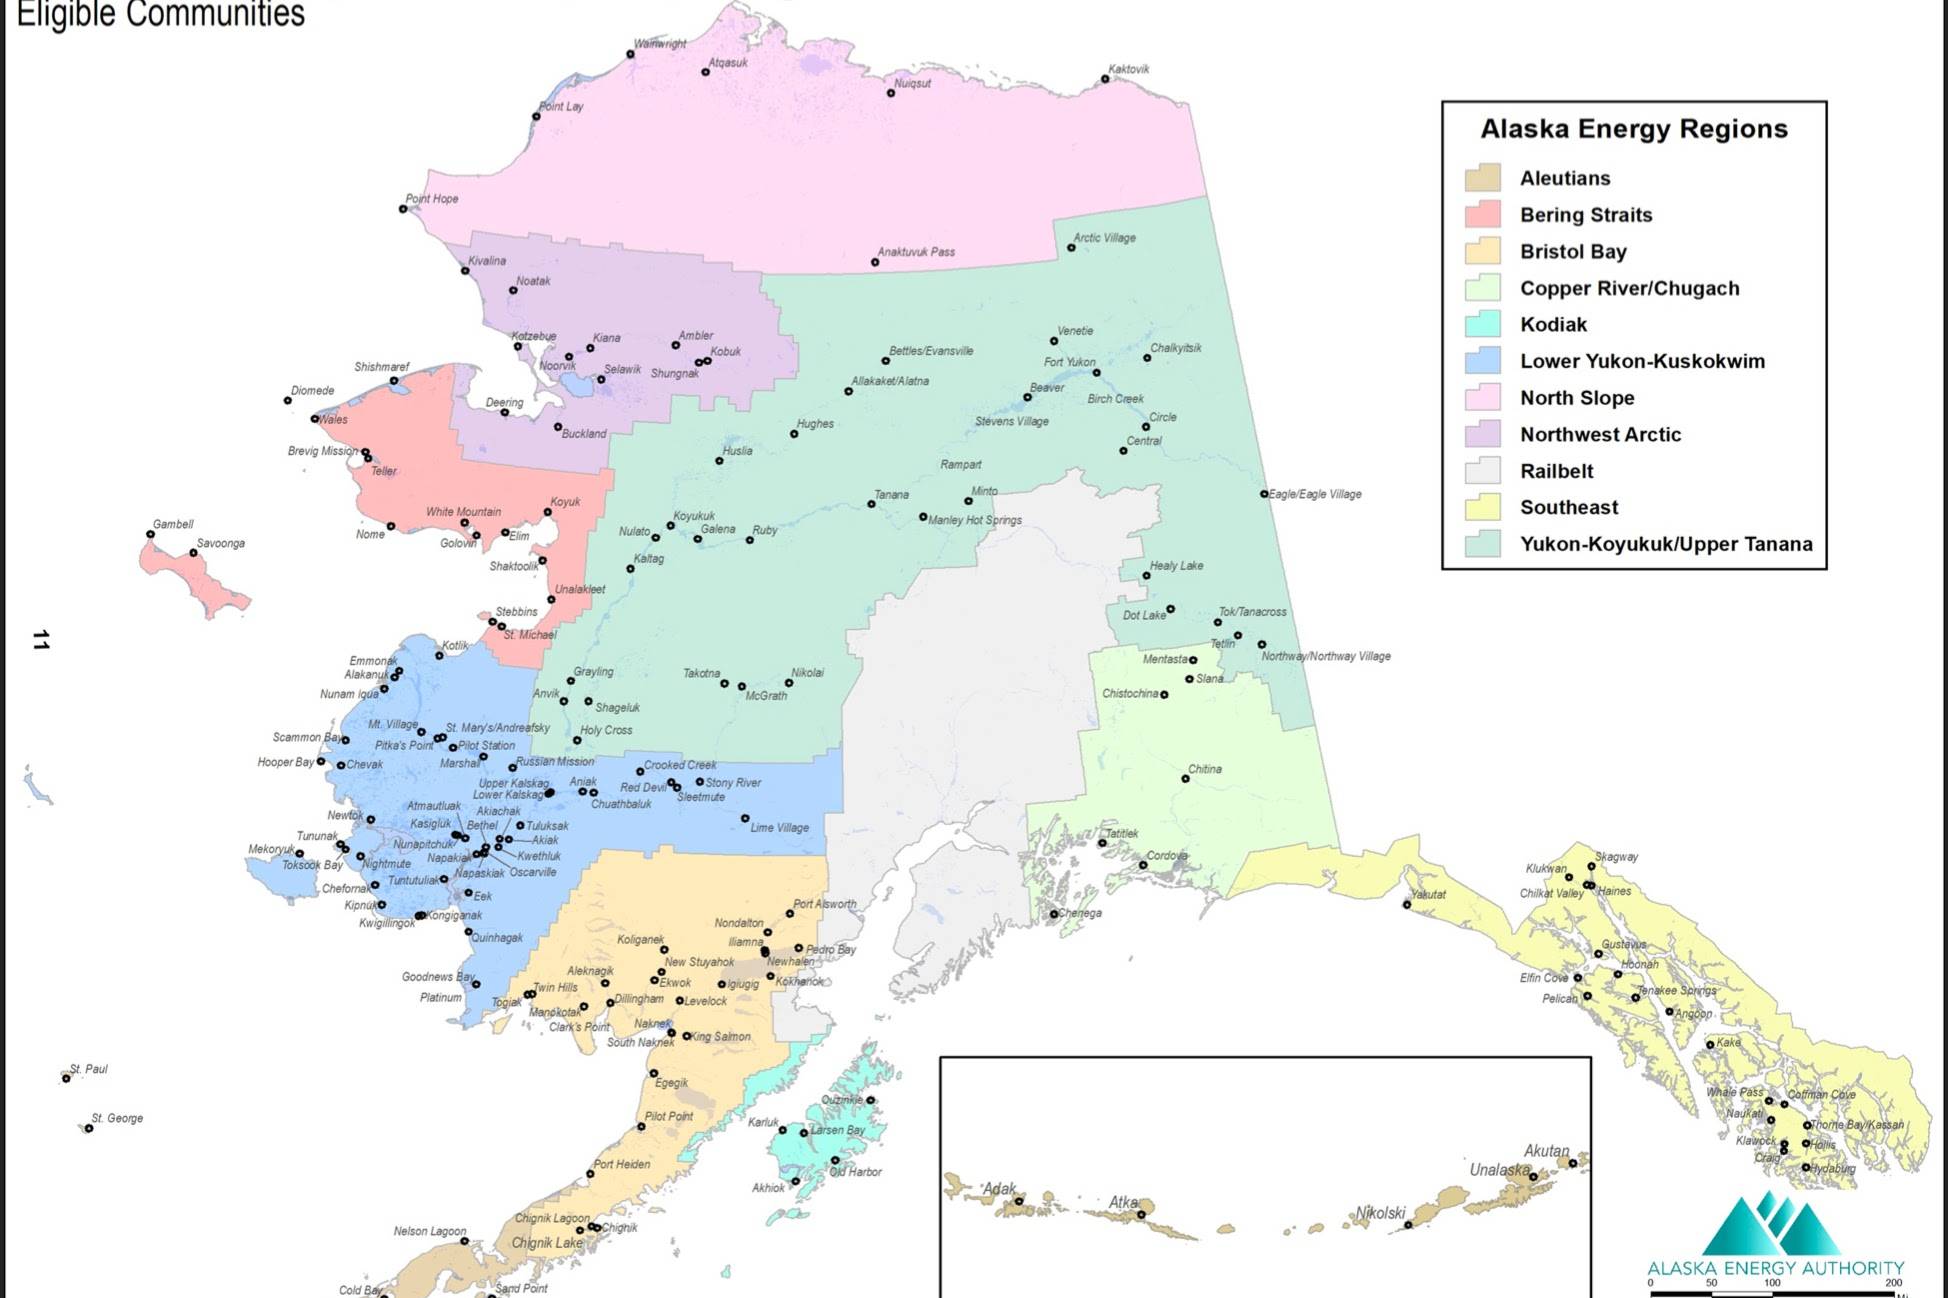 A map from the Alaska Energy Authority showing all the communities in Alaska eligible for the Power Cost Equalization program which subsidizes power costs in rural areas. Funding for the program has been caught up in year-to-year budget battles and lawmakers are hopeful they can address the issue in the next special session of the Alaska State Legislature. (Courtesy image / Alaska Energy Authority)